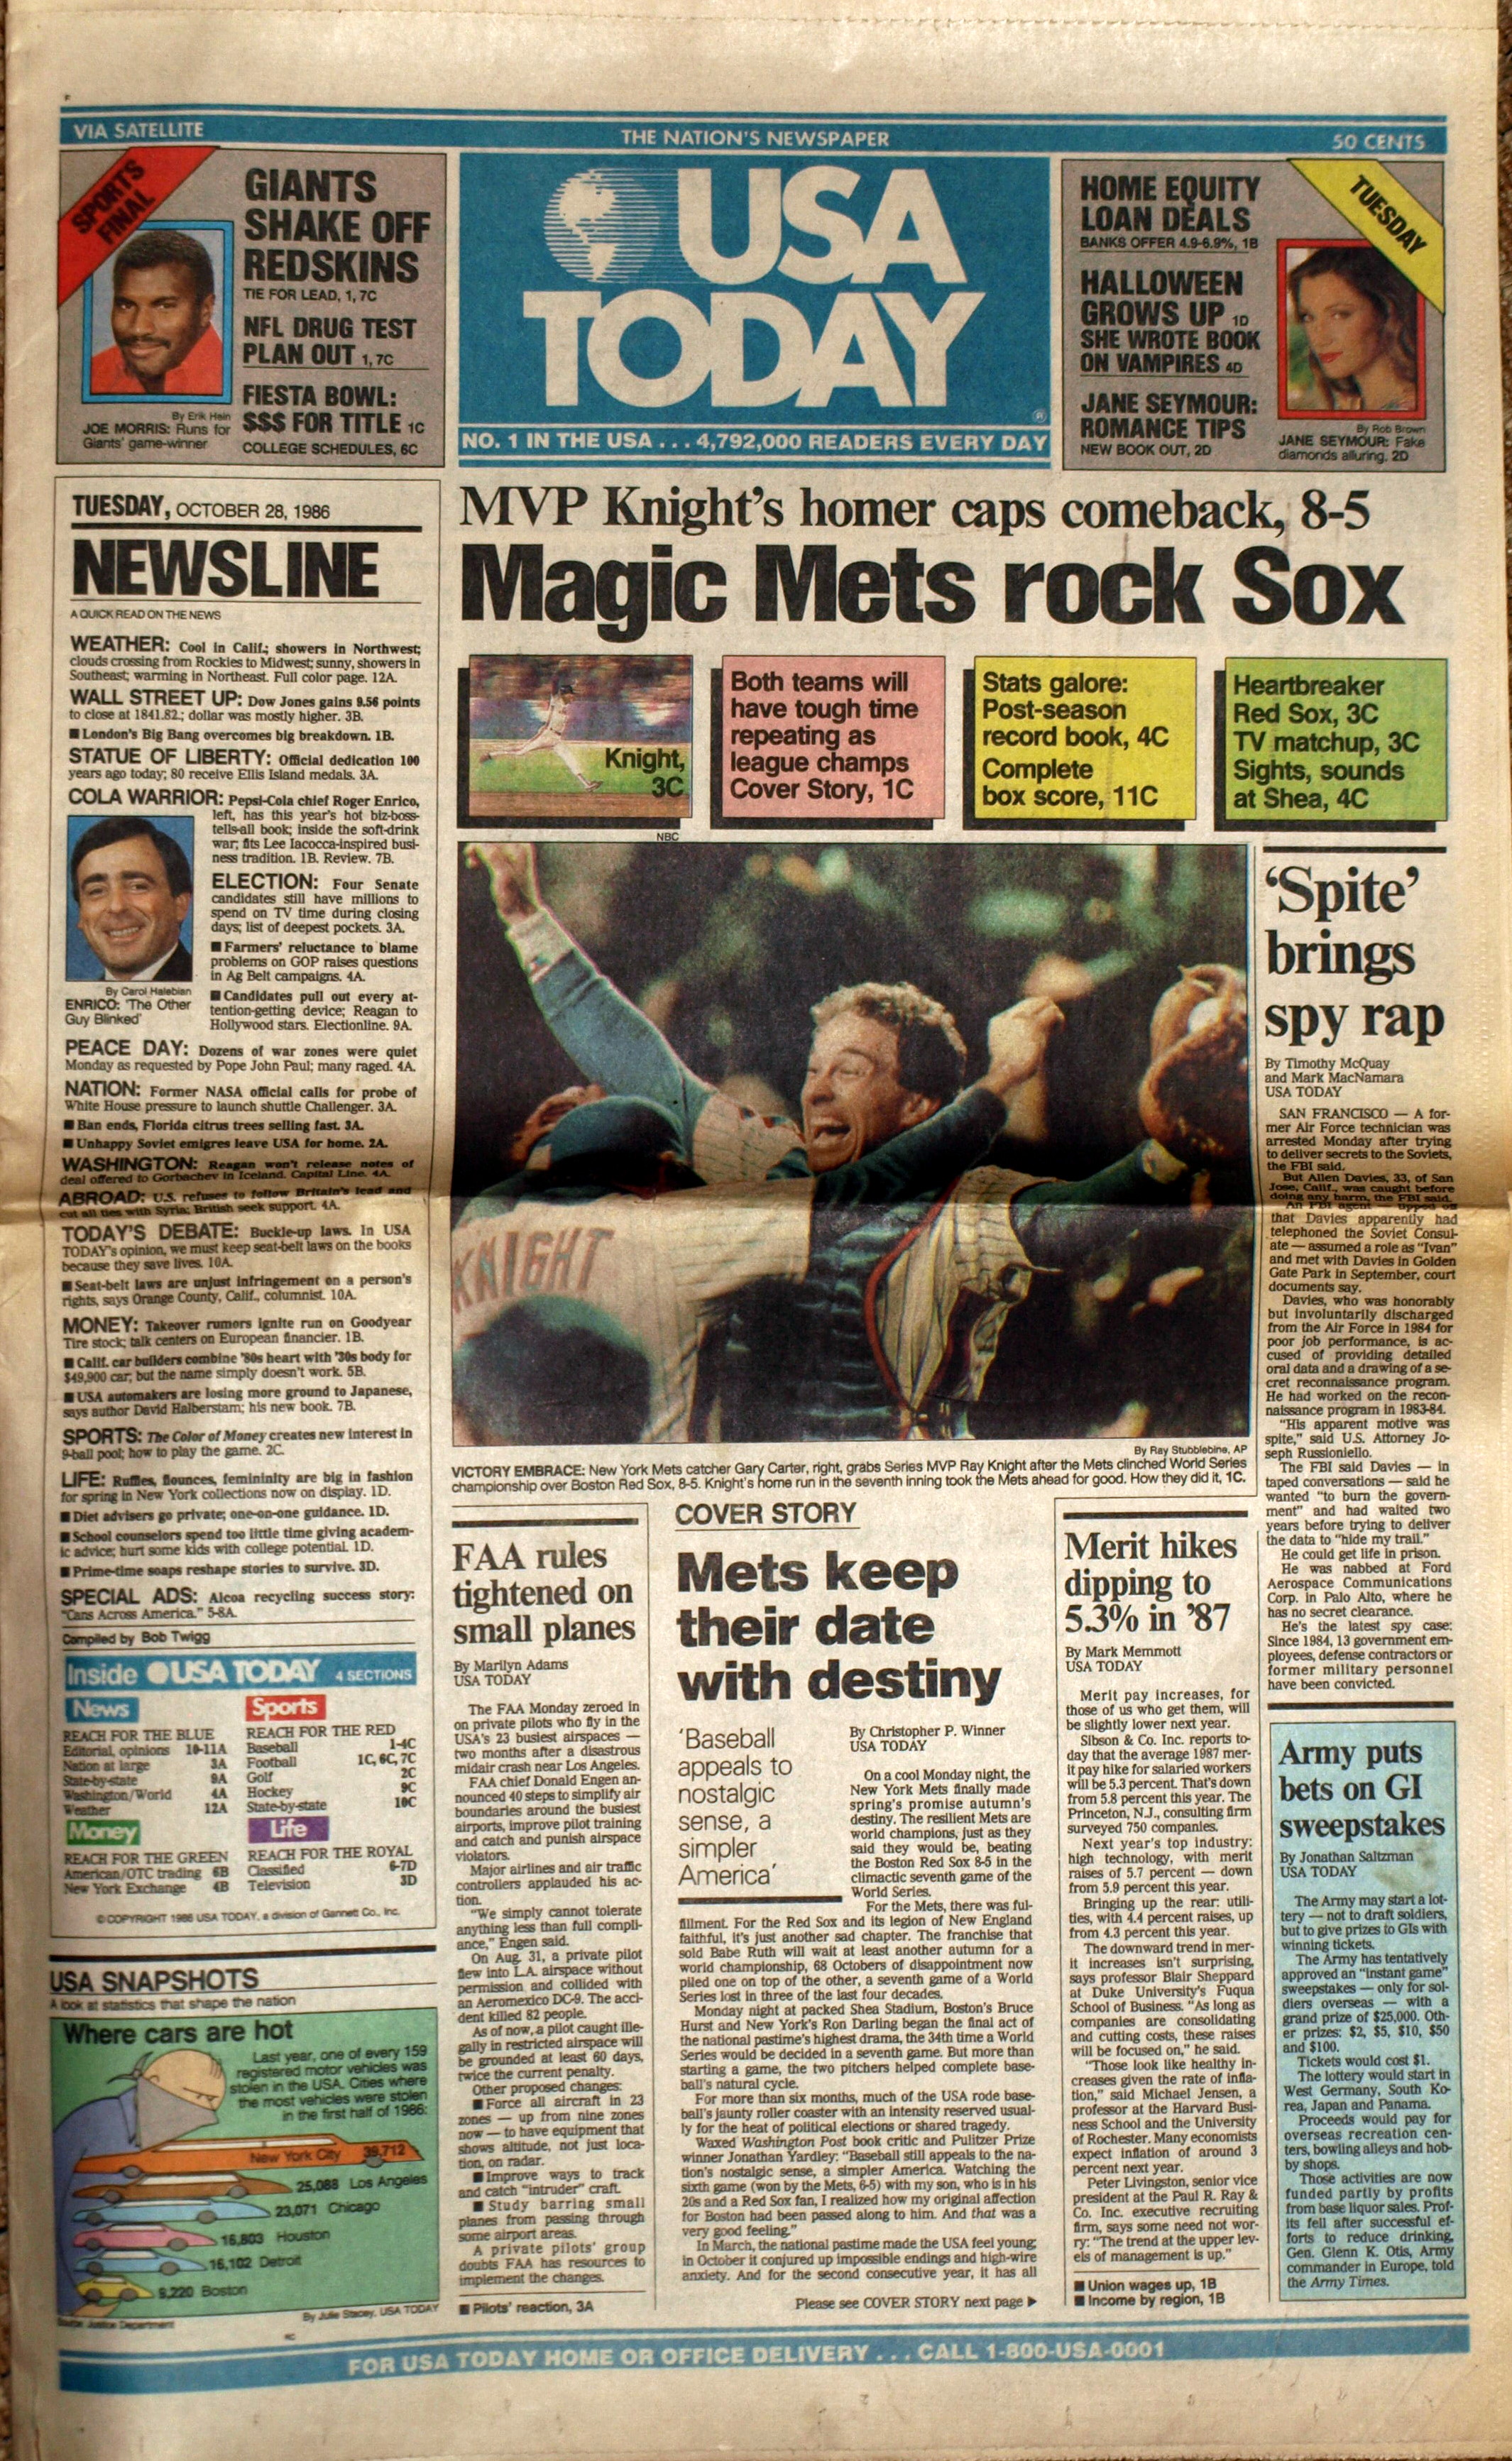 7-4-1985 USA TODAY NEWSPAPER USA CELEBRATES 209 YEARS YOUNG COMPLETE 